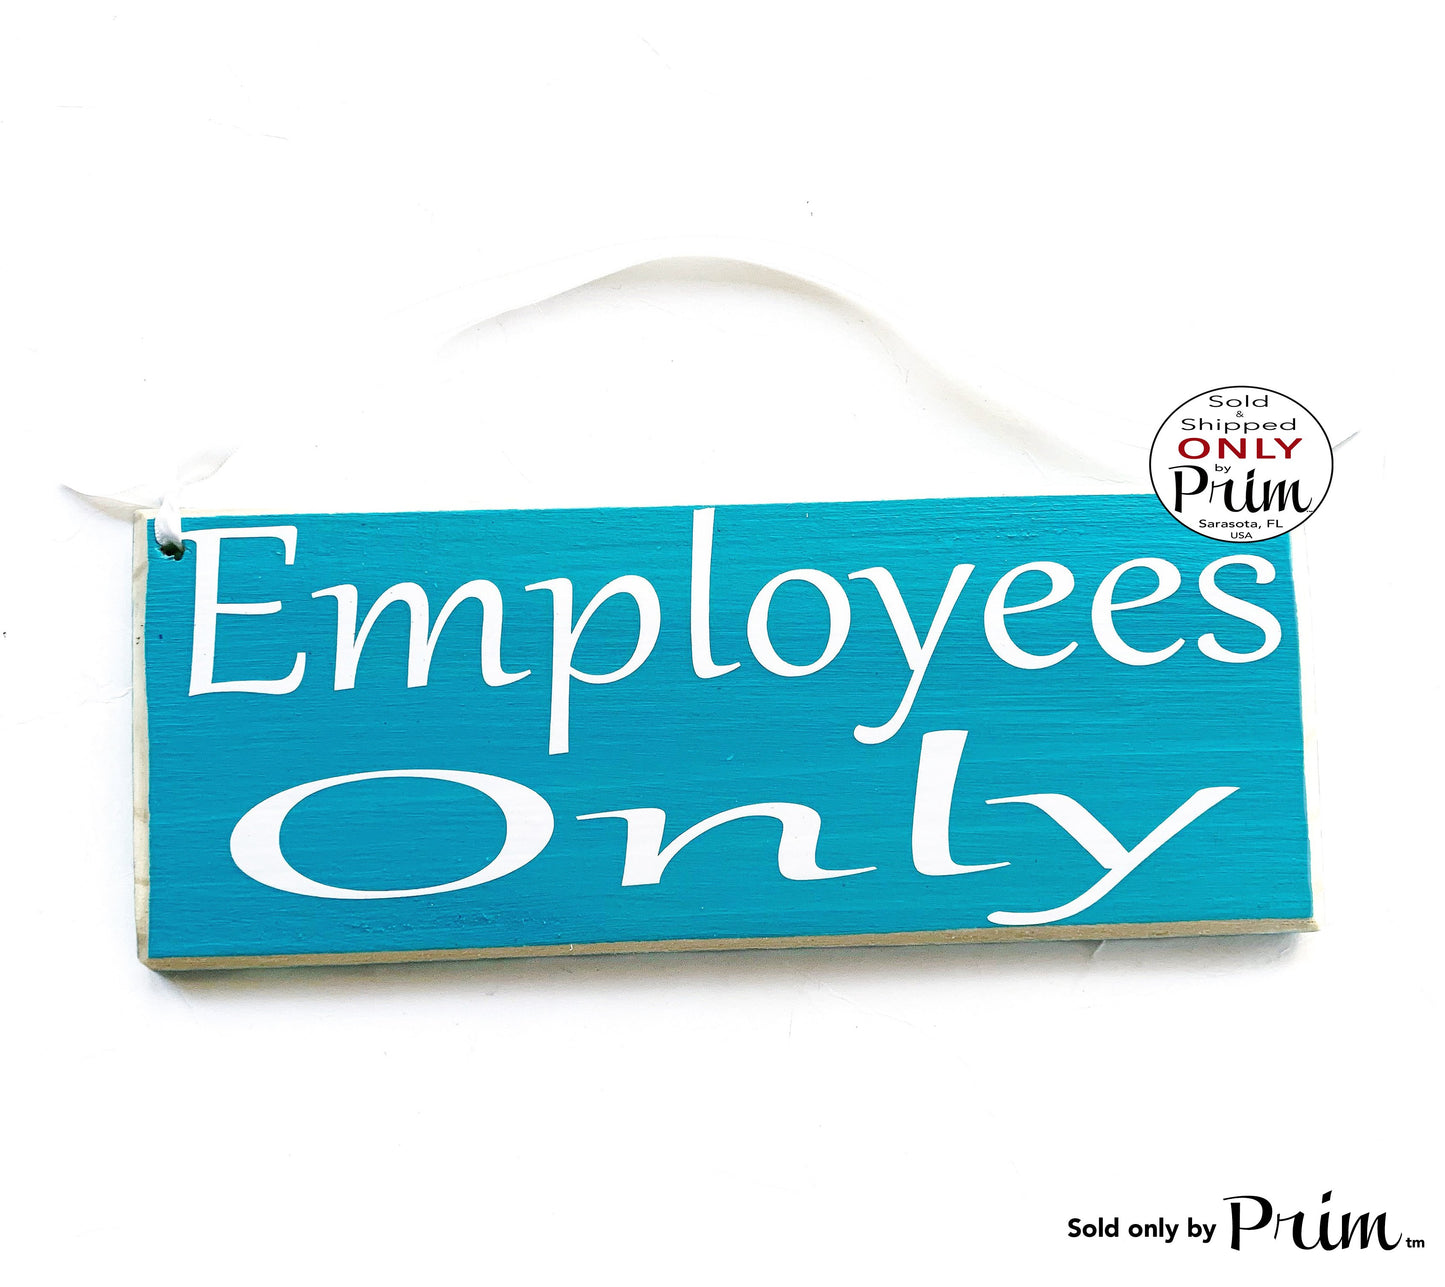 10x4 Employees Only Custom Wood Sign | Salon Shop Business Office Staff Only Do Not Enter Private No Entry Wall Decor Hanger Door Plaque